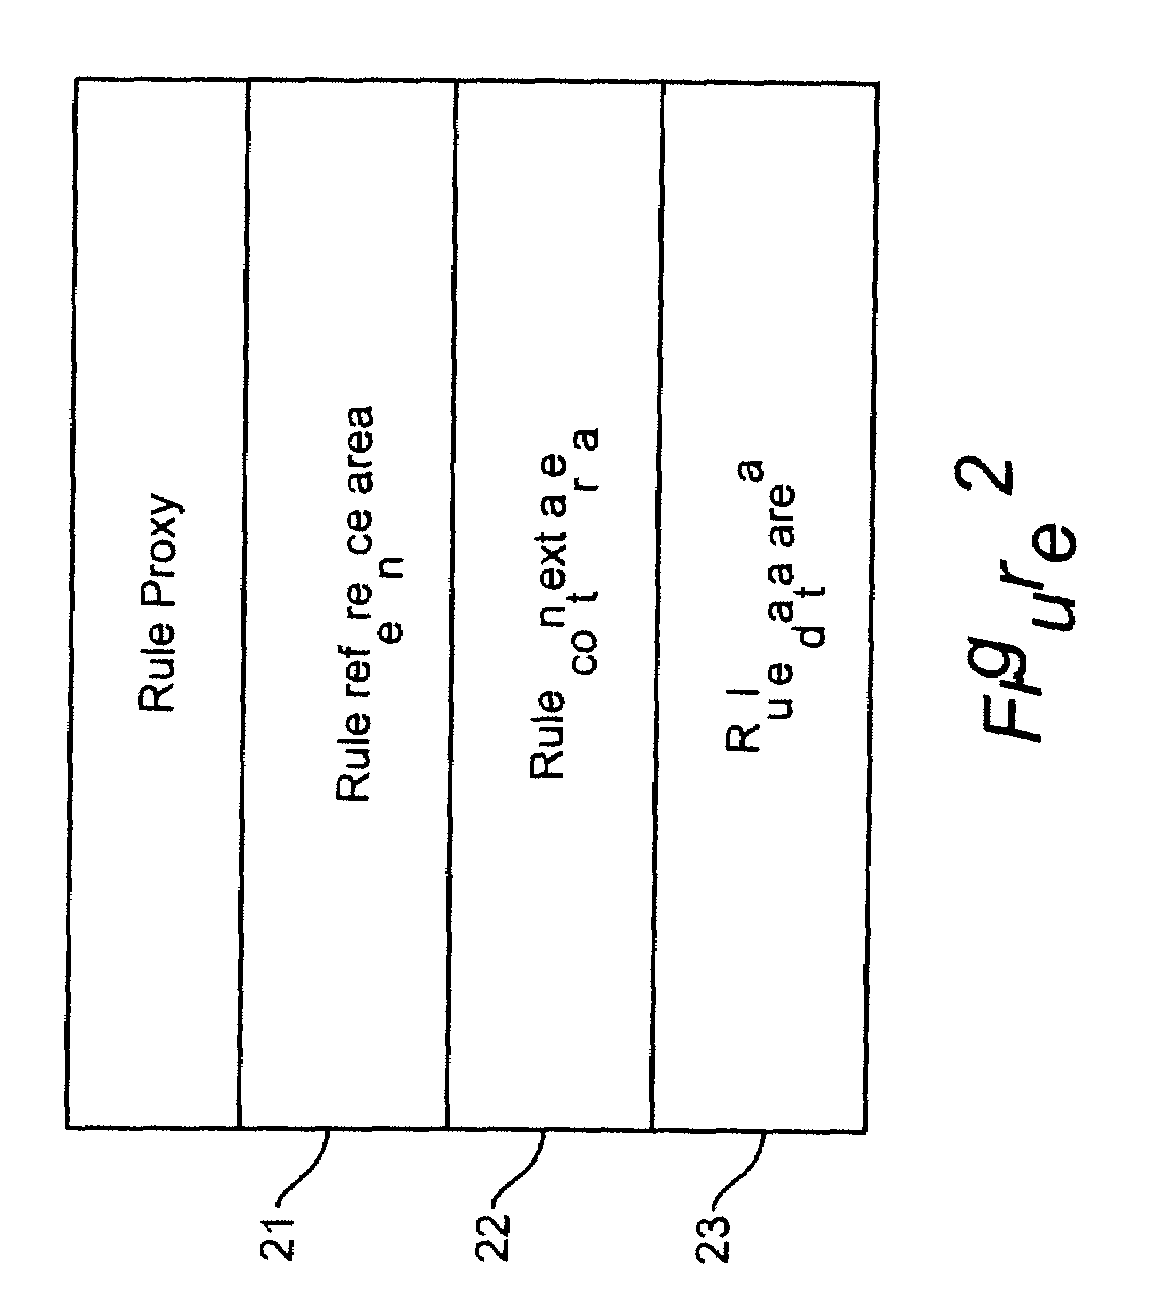 Method and Apparatus for Using Meta-Rules to Support Dynamic Rule-Based Business Systems